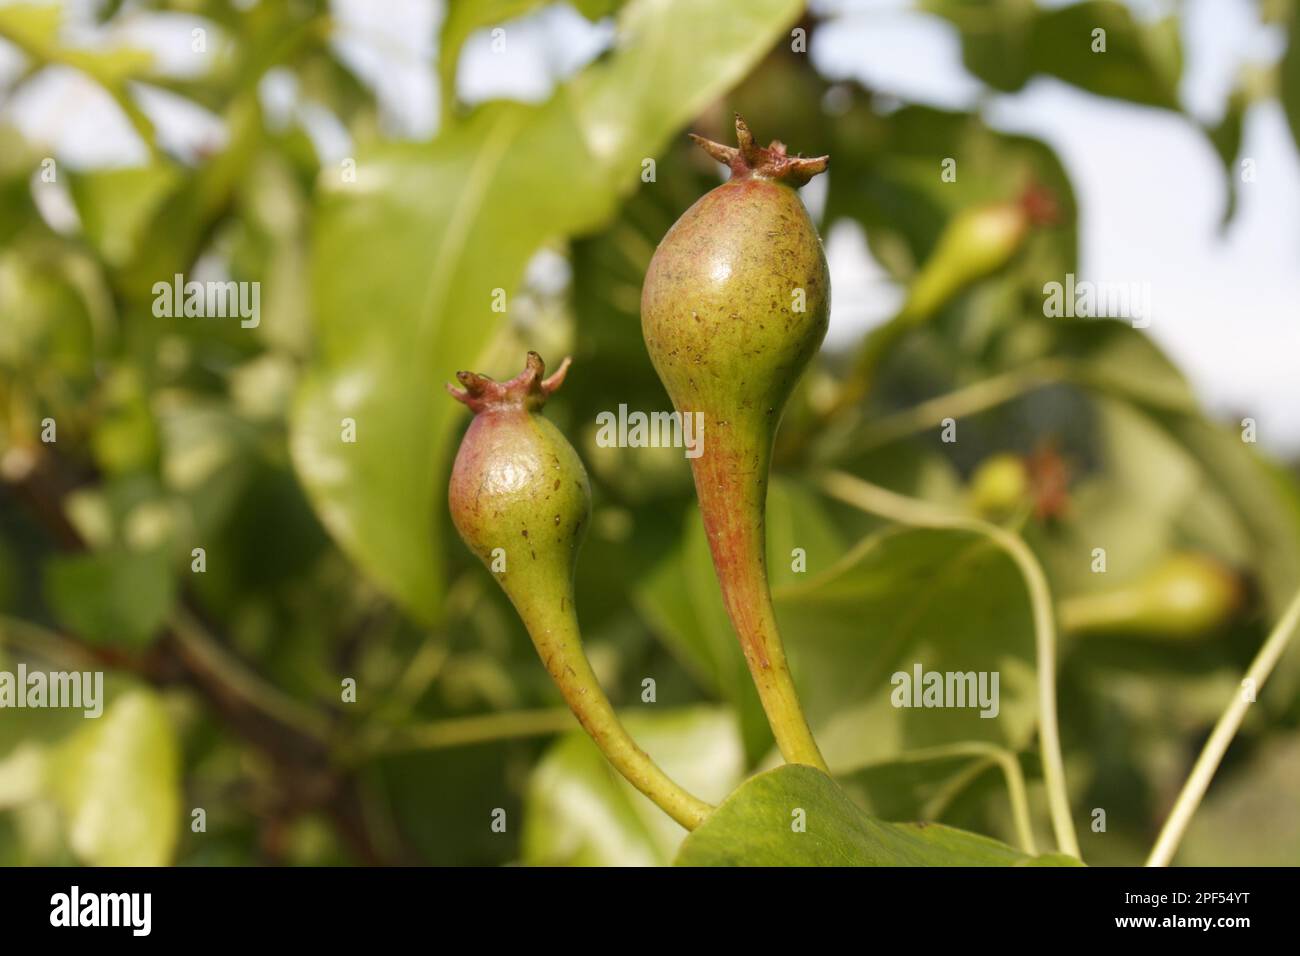 Common Pear (Pyrus communis) 'Conference', close-up of developing fruit, in garden, Suffolk, England, United Kingdom Stock Photo